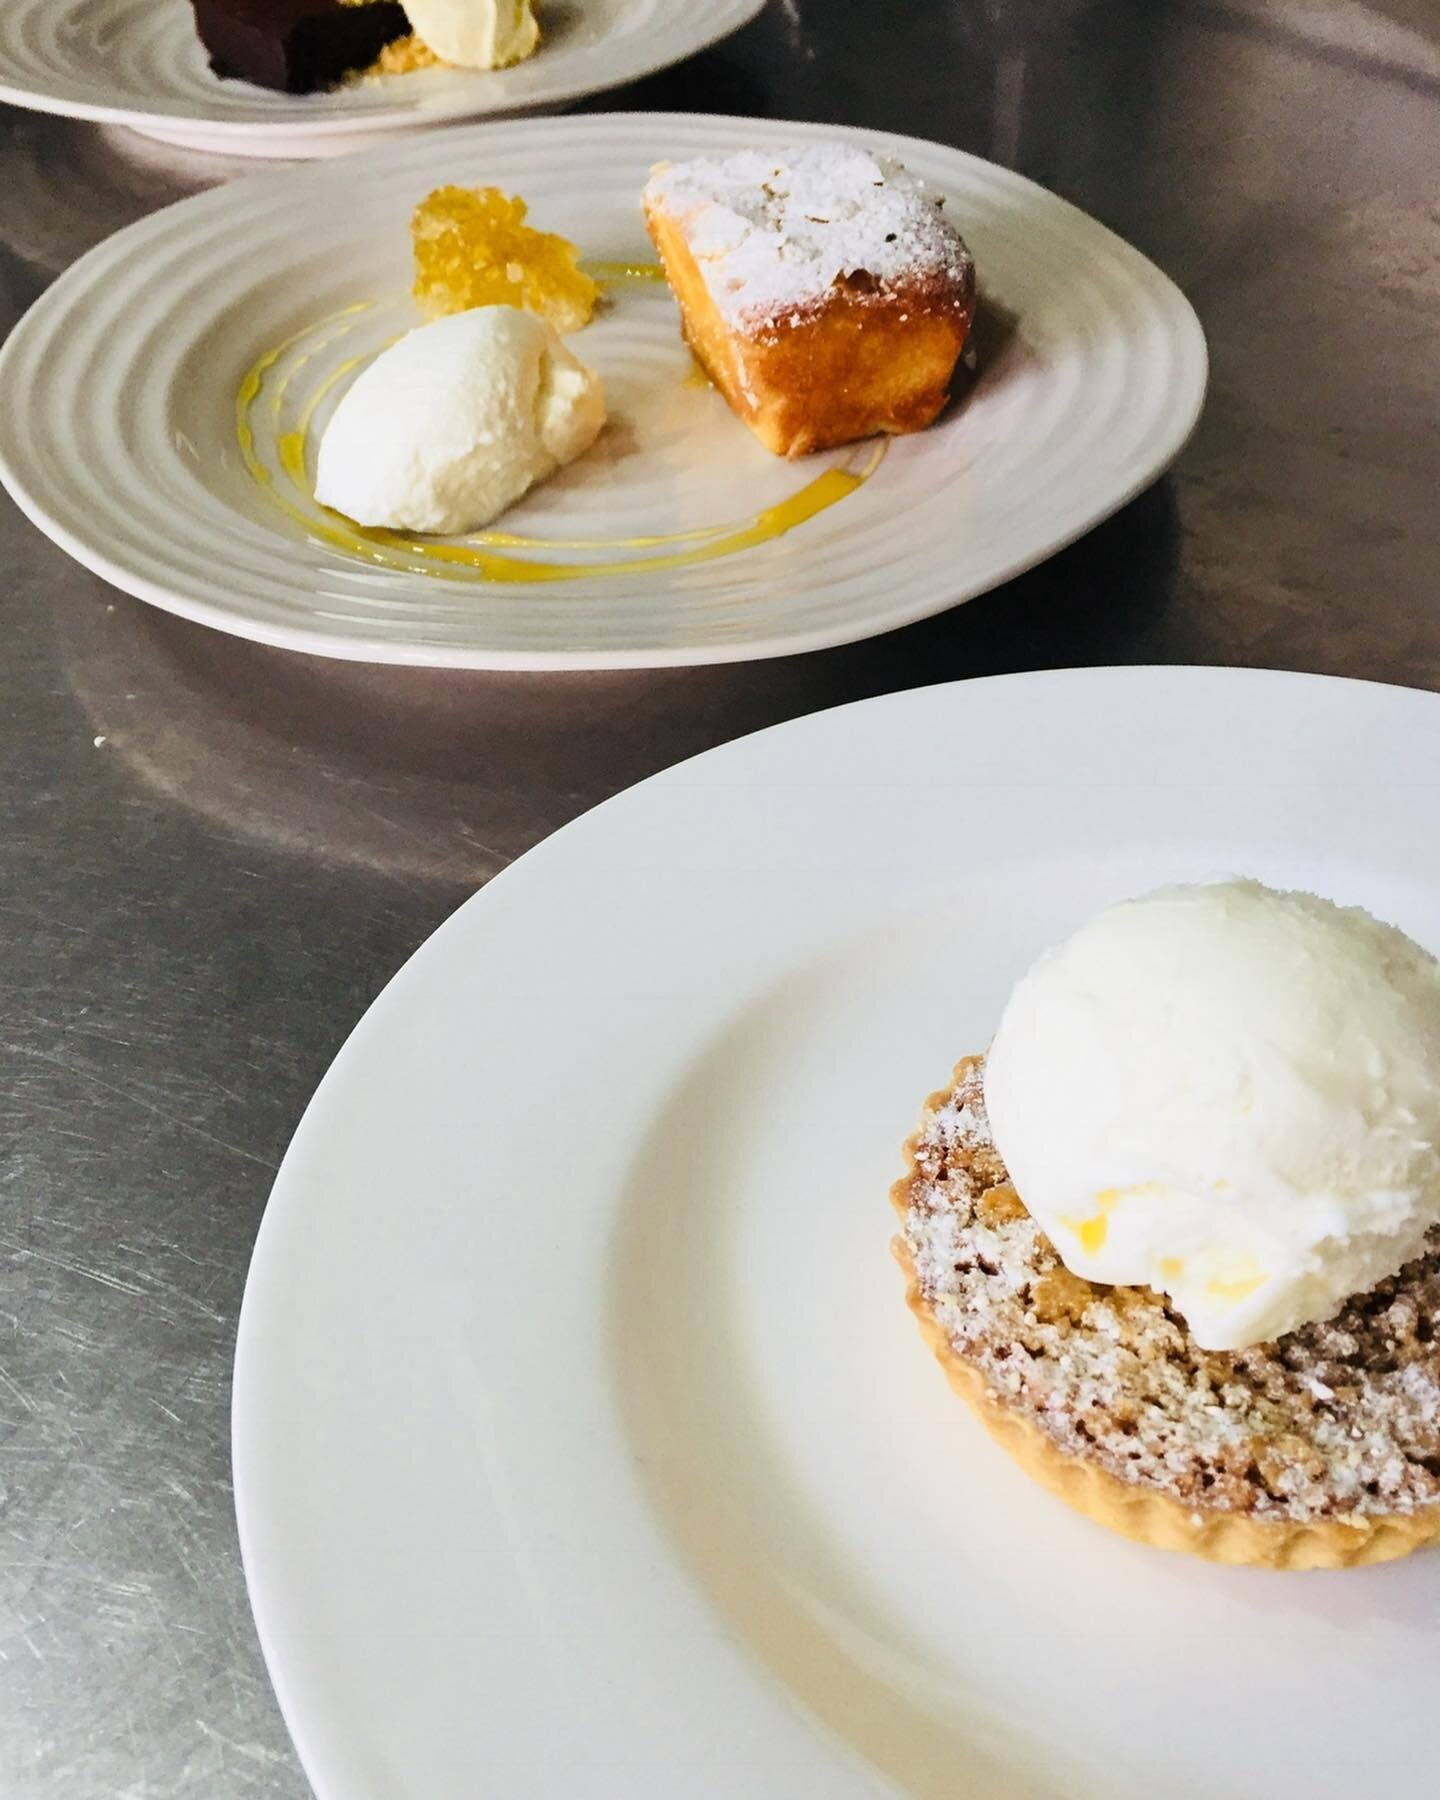 Treacle Tart, Lavender Cake &amp; Chocolate Truffle Cake.
.
.
.
.
.
.
#food #foodie #instafood #yummy #delicious #dessert #dinner #restaurant #tasty #lunch #eat #chef #foodphotography #yesmichelinguide #michelinguide #buckinghamshire #treacletart #ch